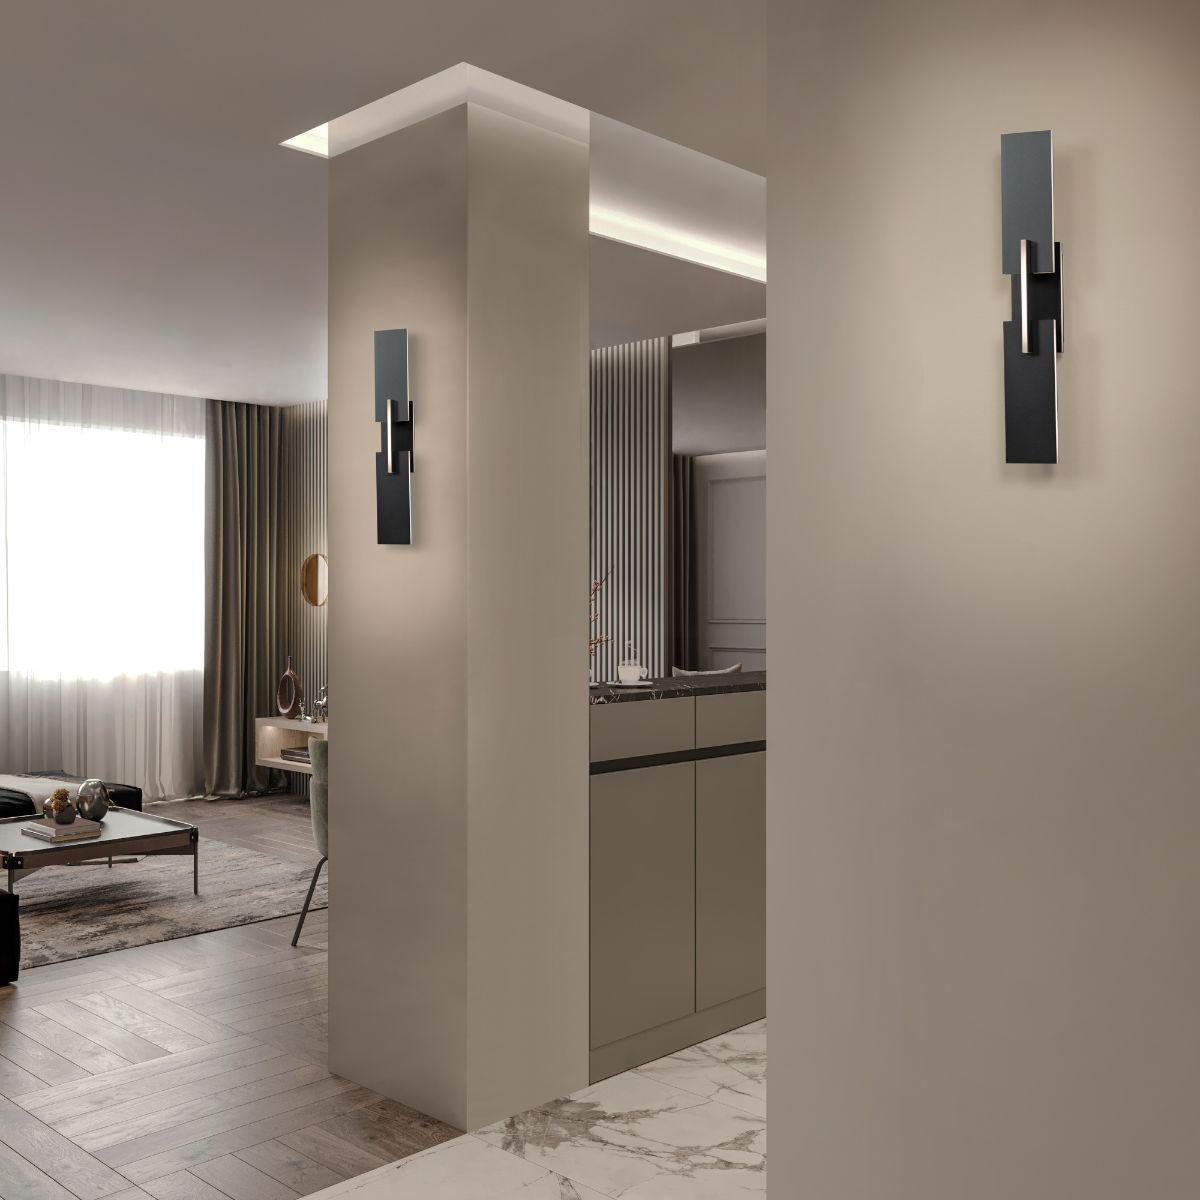 Amari 22 in. LED Wall Sconce - Bees Lighting